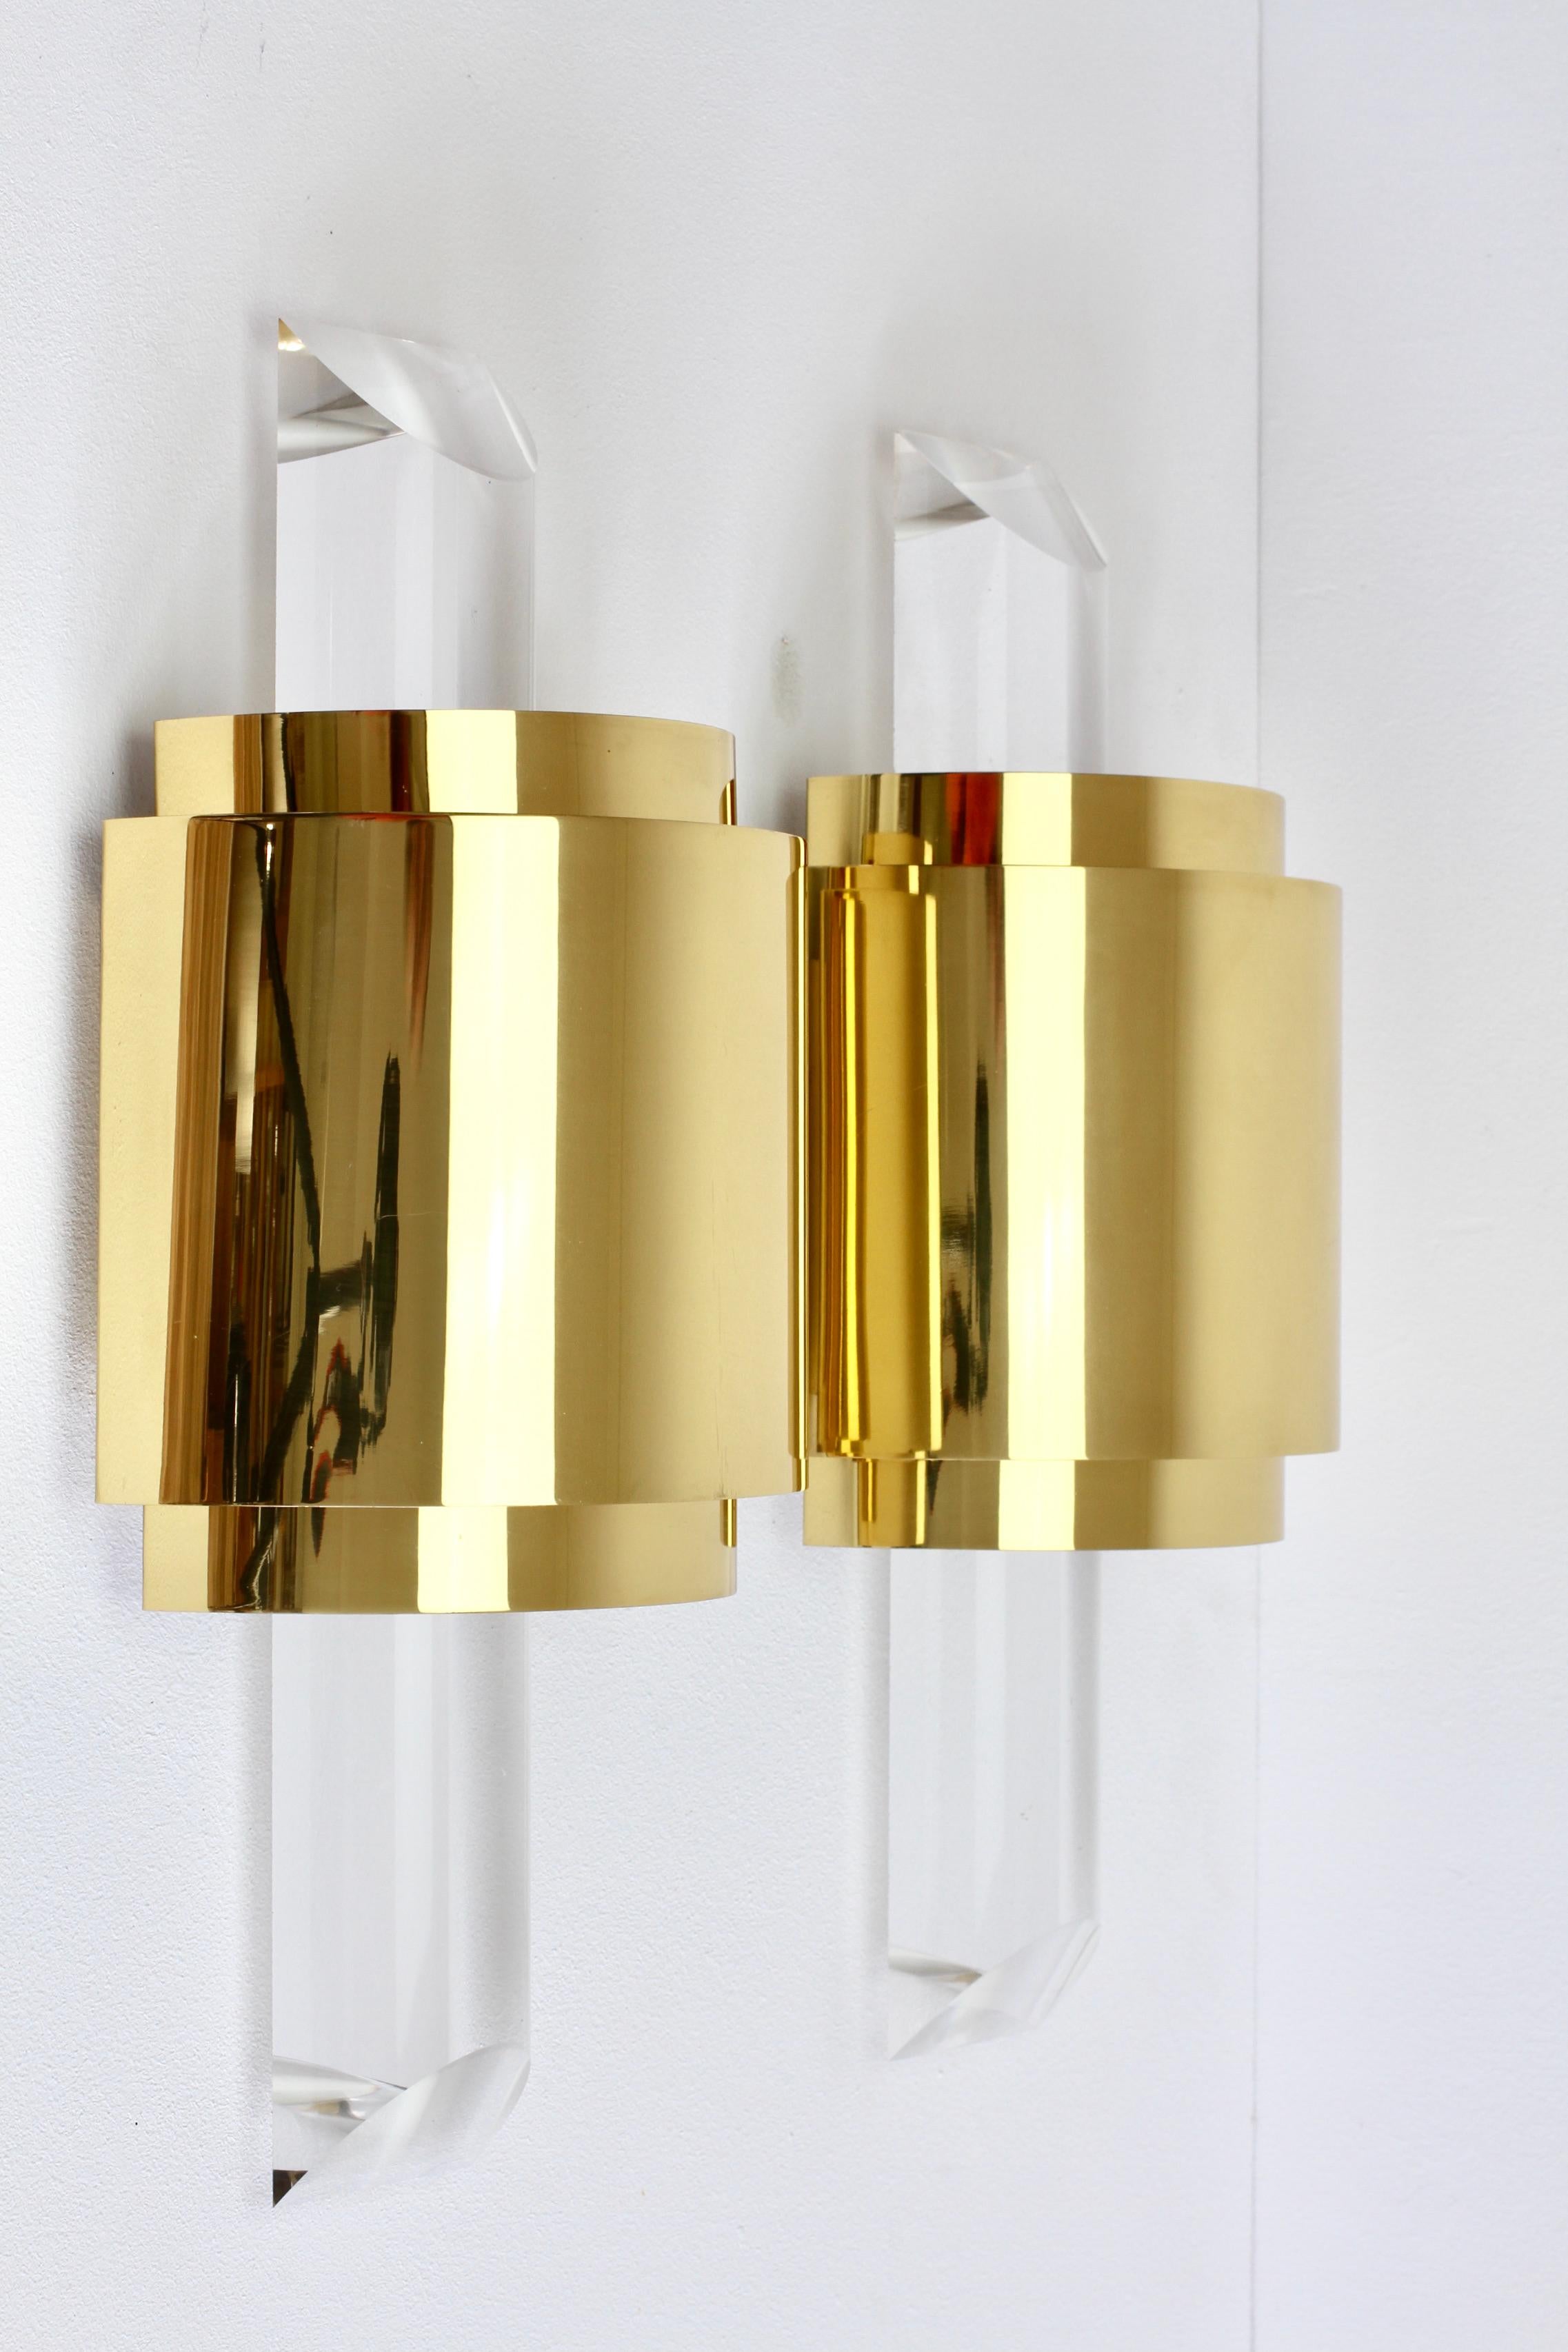 Large Hollywood Regency Lucite and Brass Wall Lights or Sconces, circa 1970s For Sale 9